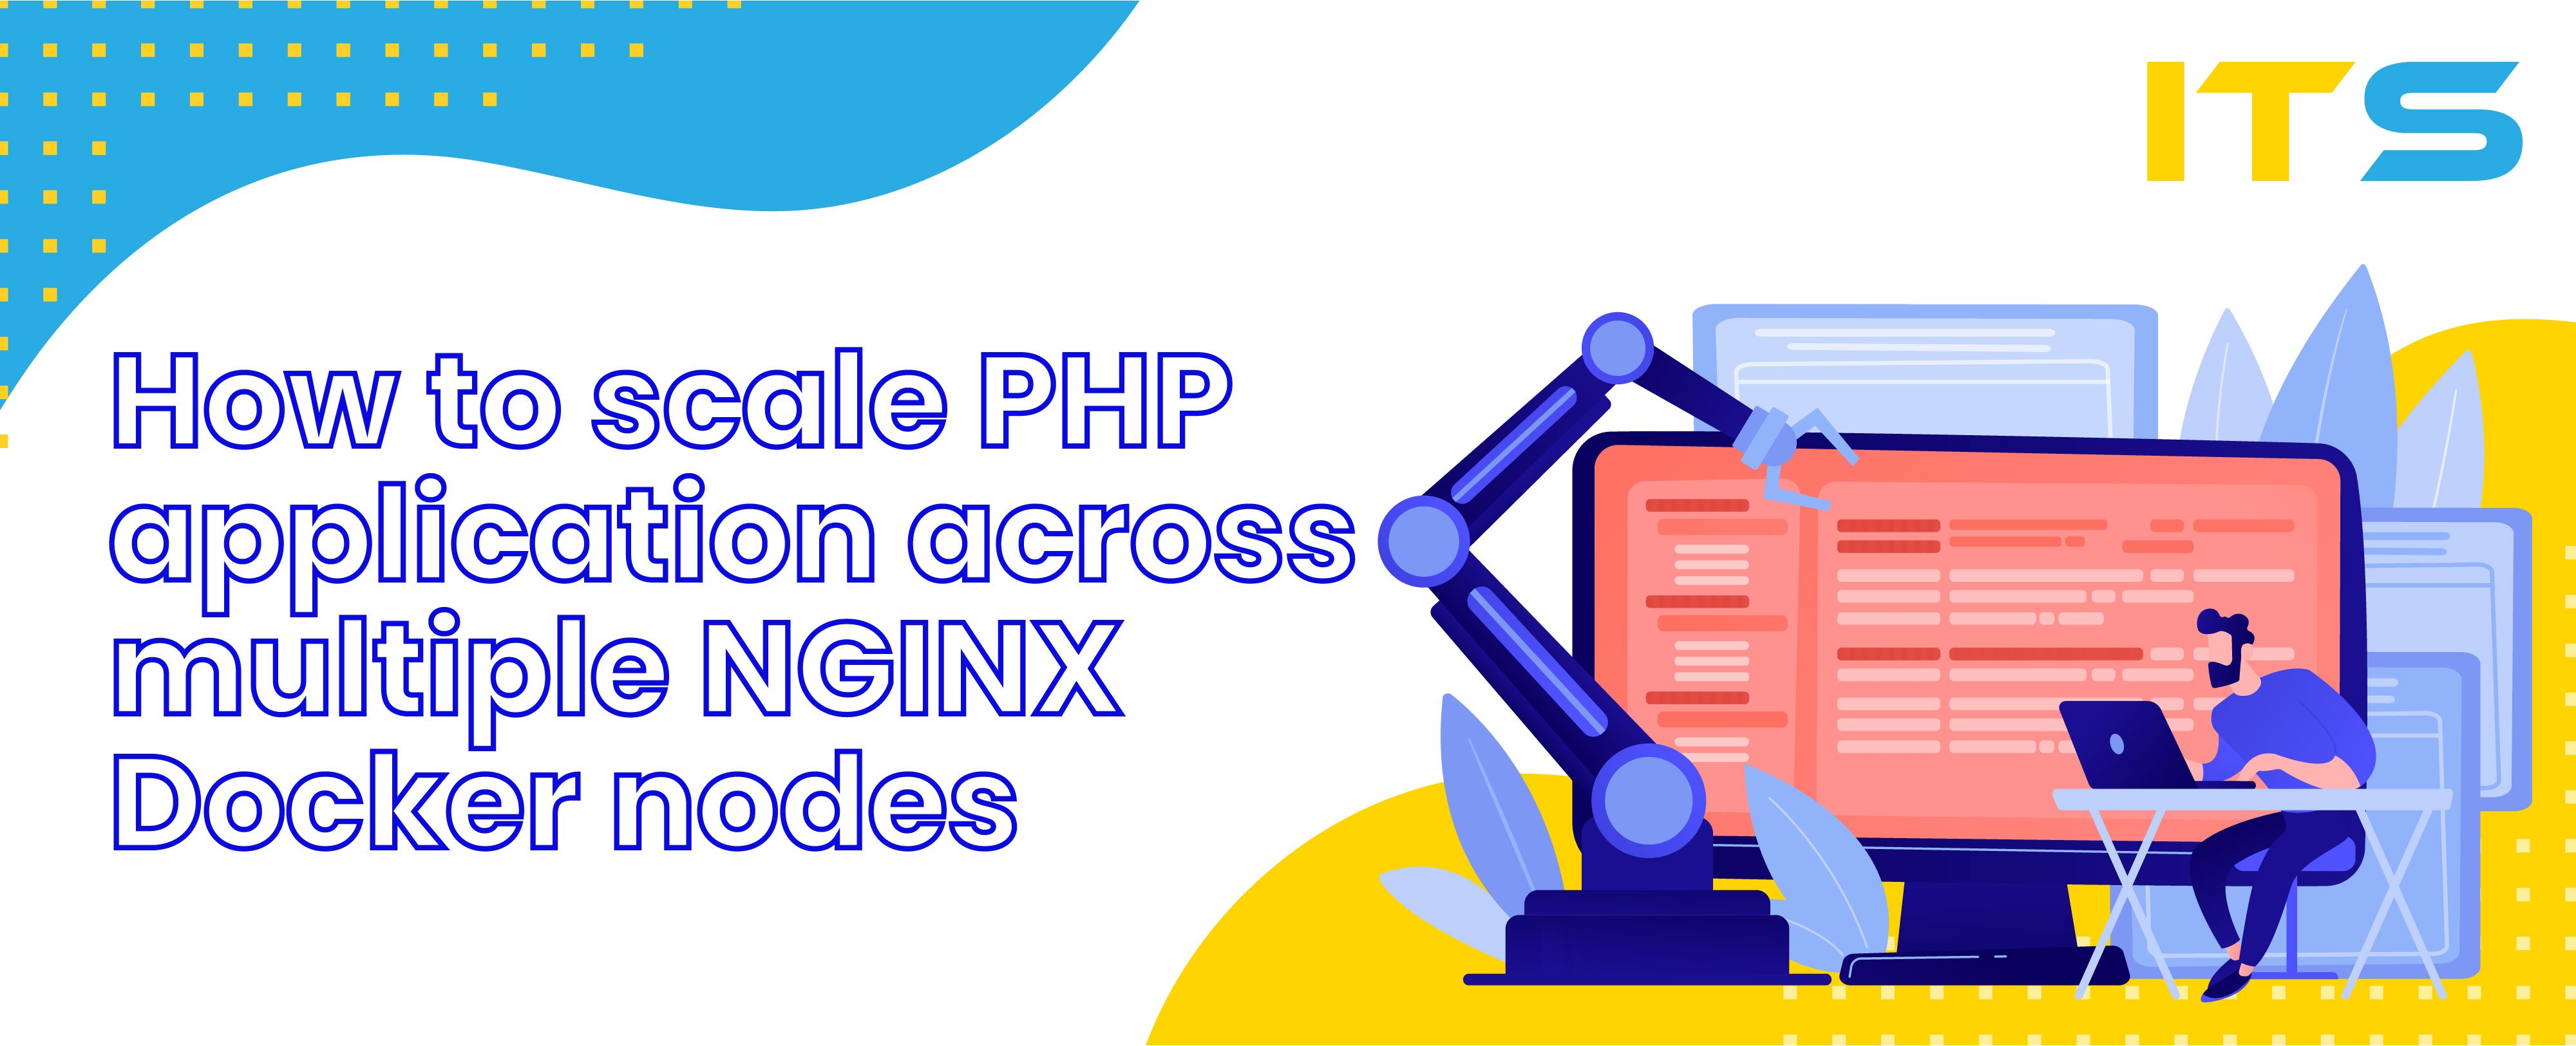 How To Scale PHP Application Across Multiple